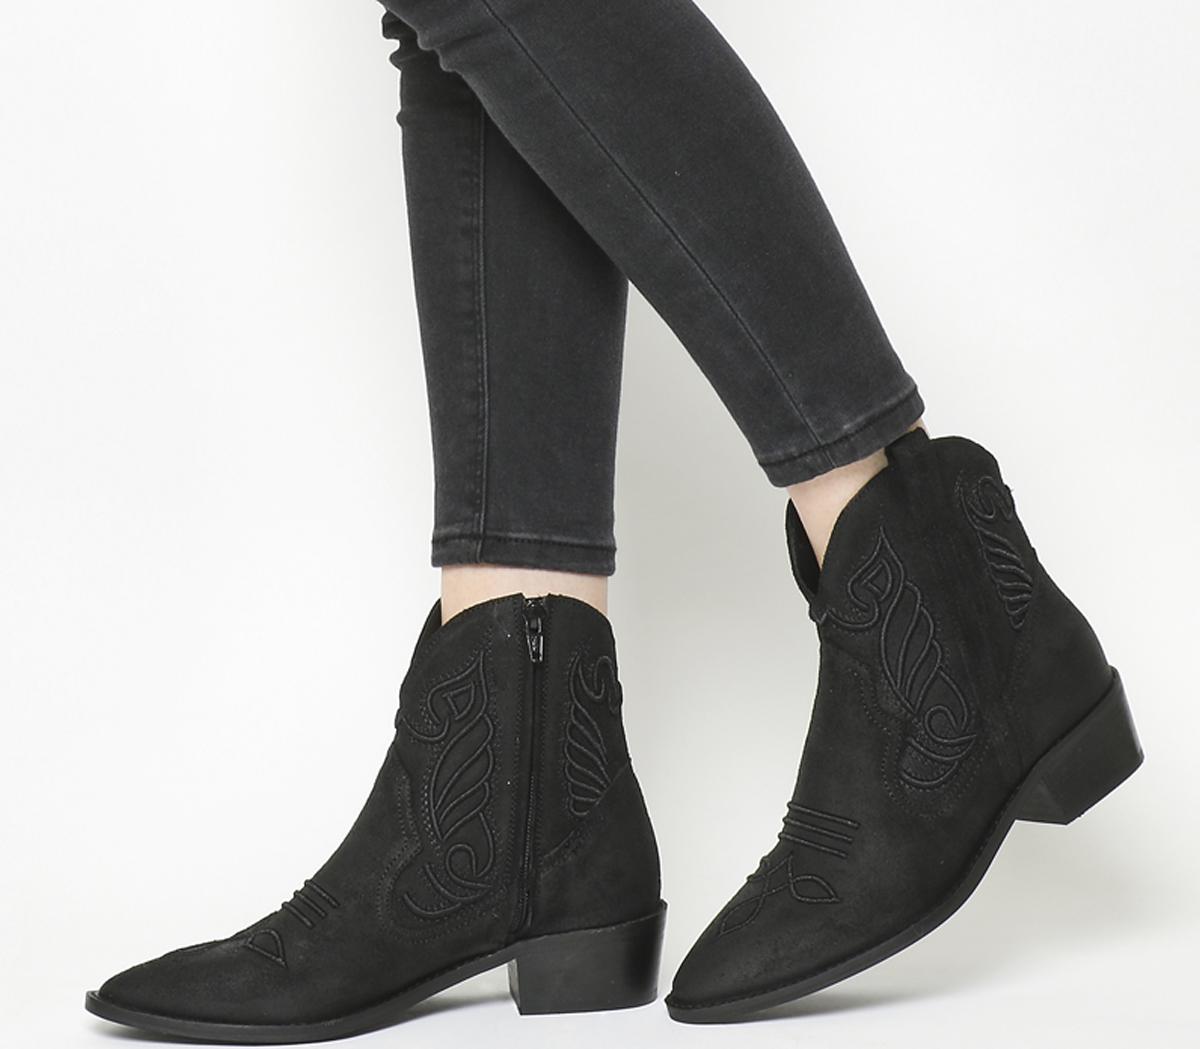 OFFICEAztec Embroidered Western BootsBlack Suede